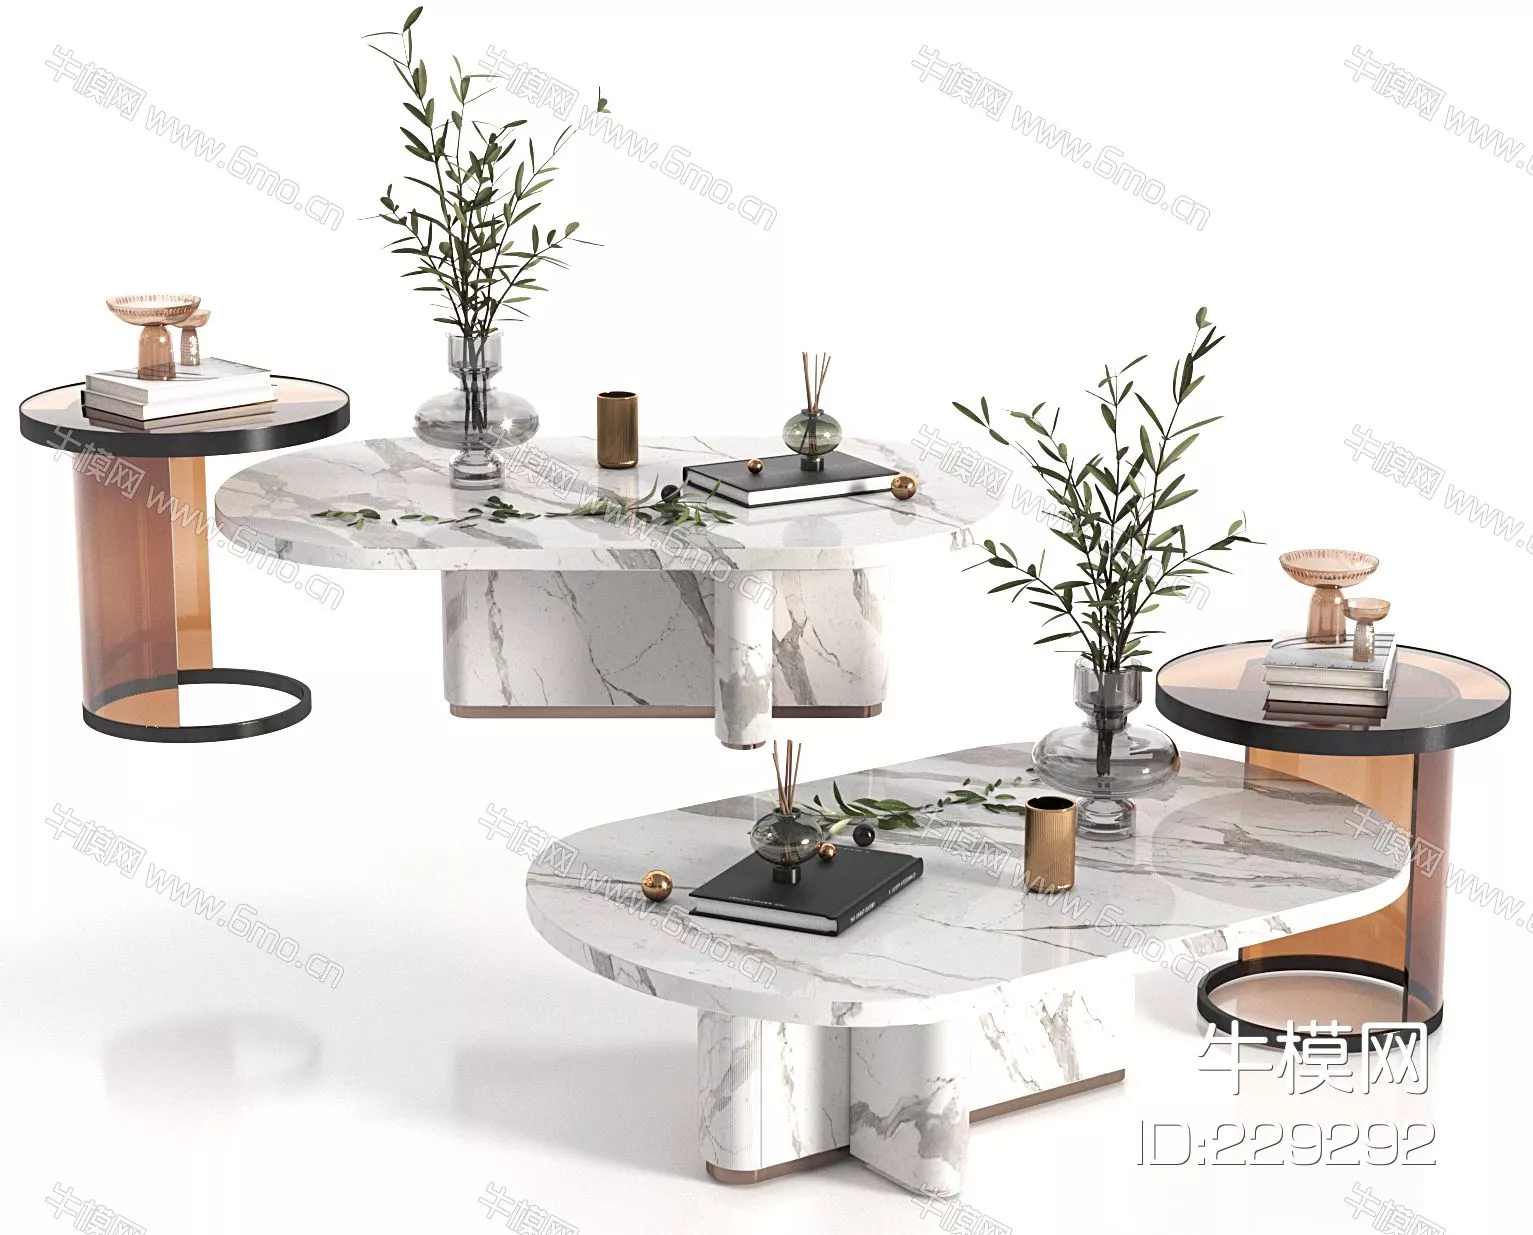 MODERN COFFEE TABLE - SKETCHUP 3D MODEL - VRAY - 229292